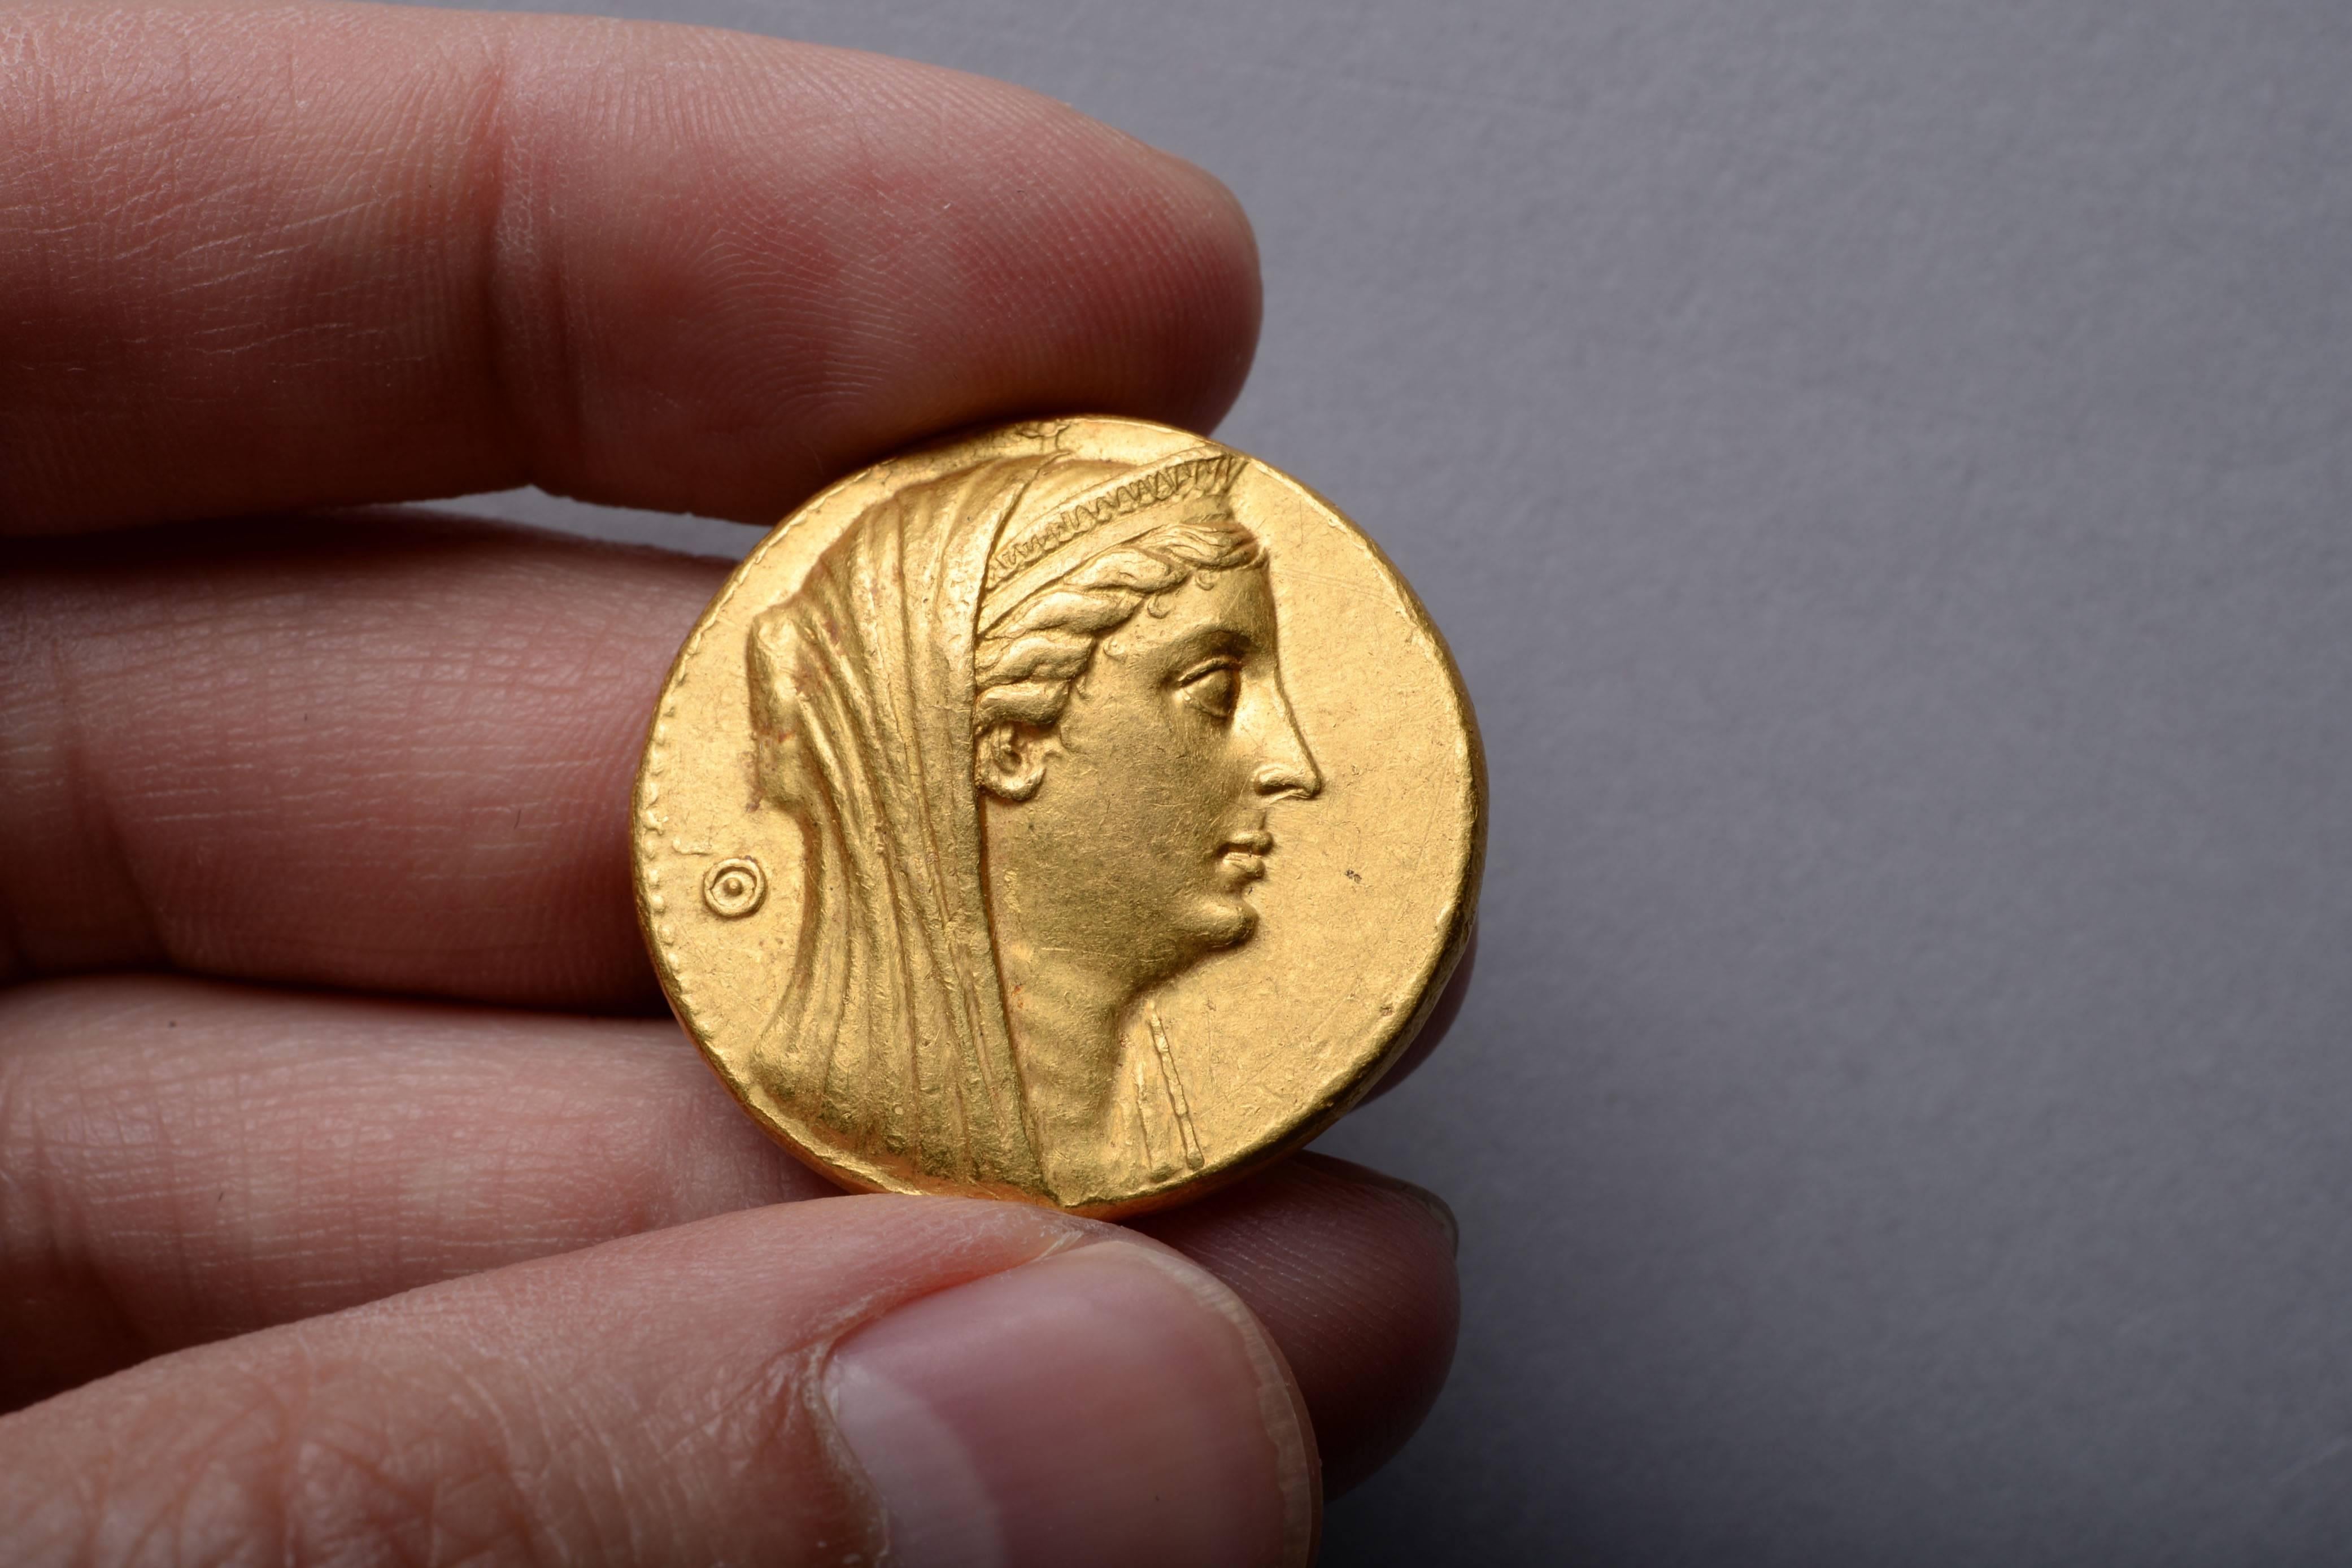 A superb example of the heaviest and most valuable gold coin from antiquity. A gold octadrachm issued under Ptolemy II Philadelphus 'sibling lover', in honour of Queen Arsinoe II. Struck at the Alexandria mint, circa 253 - 246 BC.

The obverse